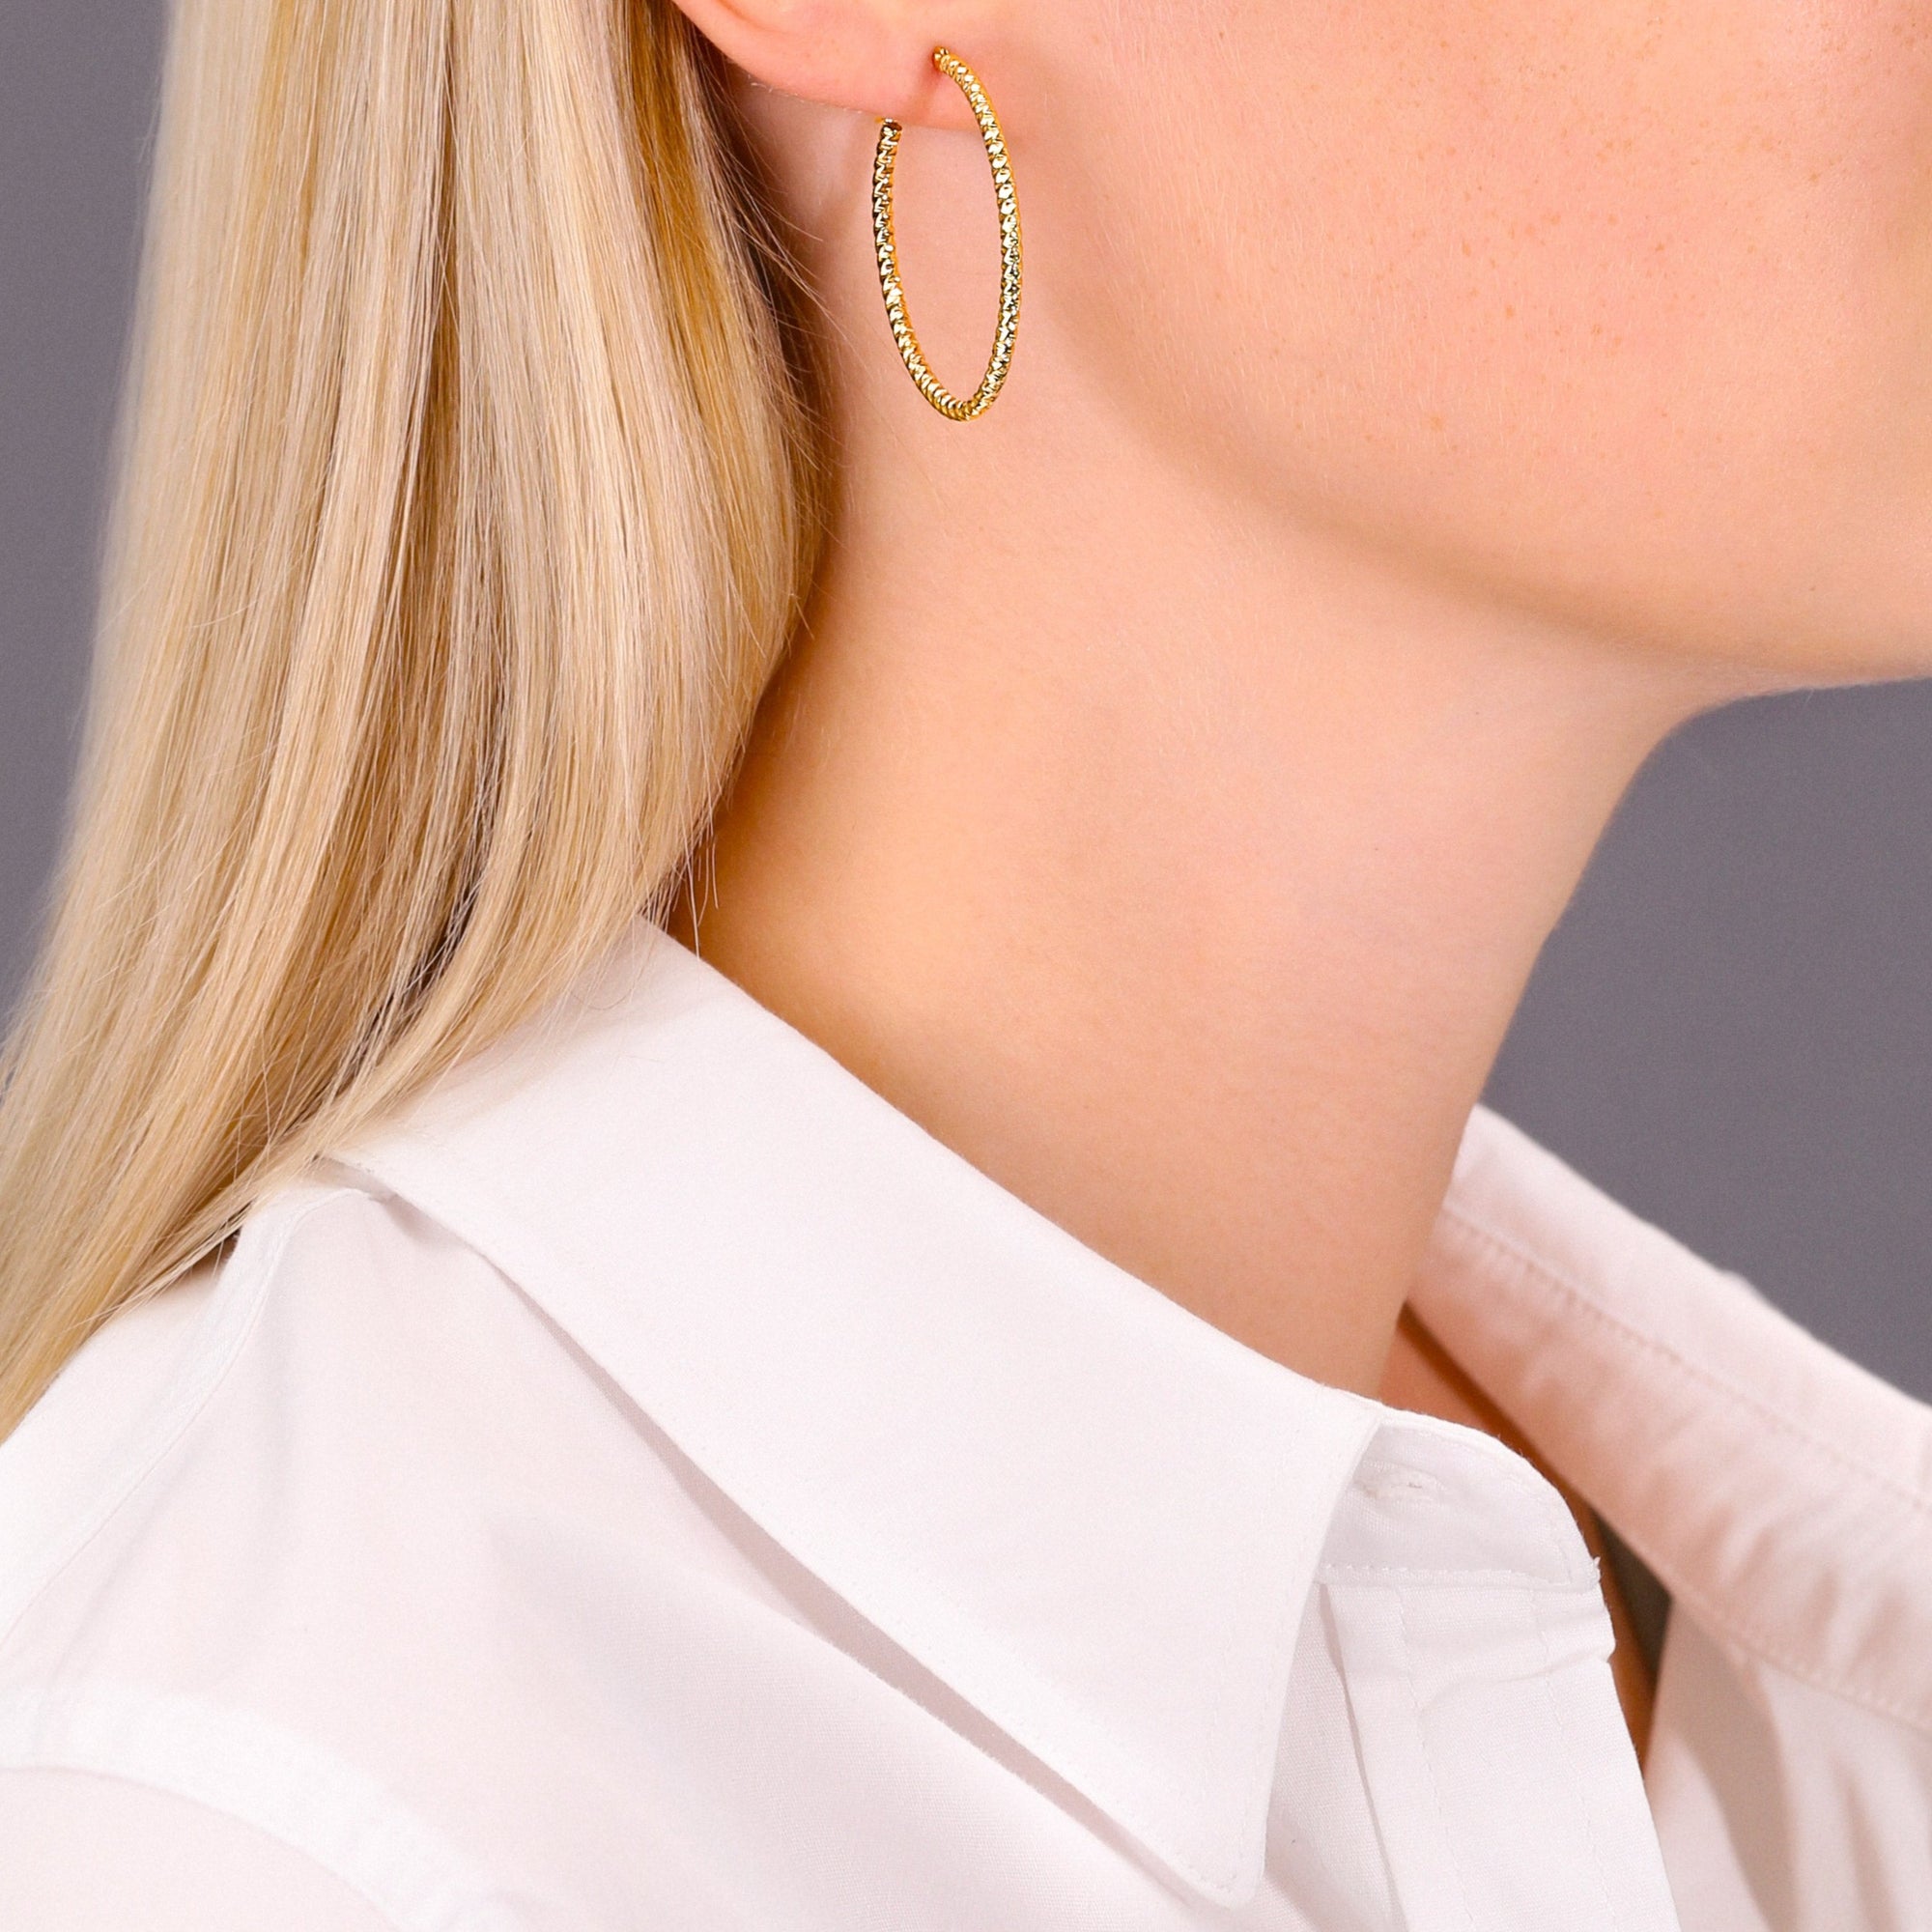 14k Yellow Gold Textured Hoop Earrings, The Twist Collection